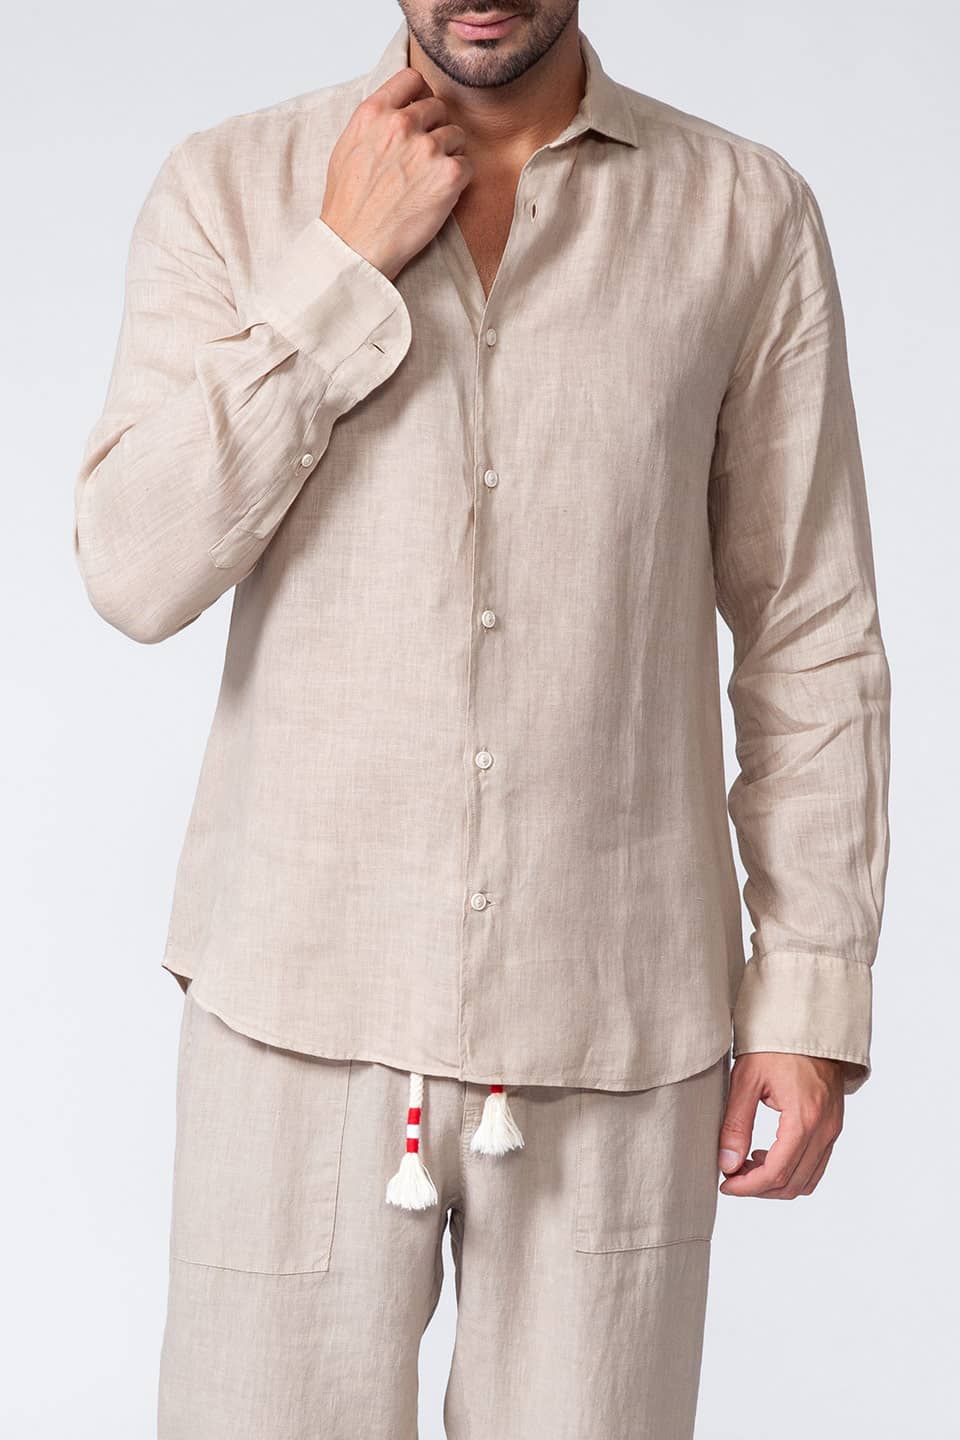 Thumbnail for Product gallery 3, MC2 Saint Barth beige linen shirt men with long sleeves, product front view